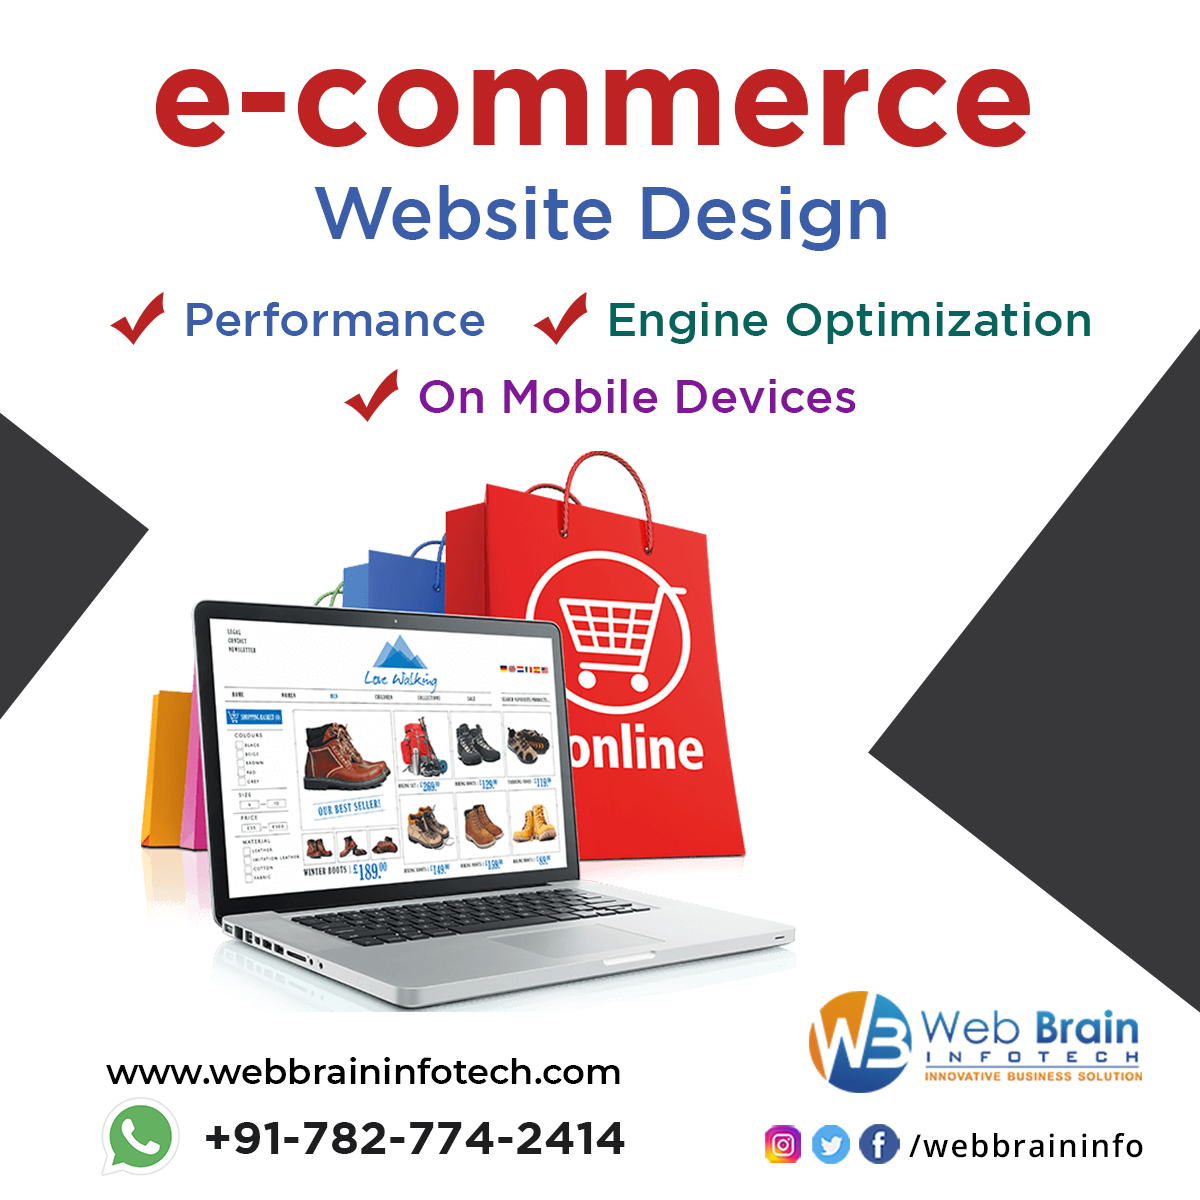 We are an experienced #ecommerce #websitedesign company in Delhi. We are geared up to assist your #company hit upon a #customsolution for your #website needs.

Call/WhatsApp us at +91-7827742414

webbraininfotech.com/ecommerce-webs…

#ecommercedesign #ecommercedevelopment #ecommercewebsite